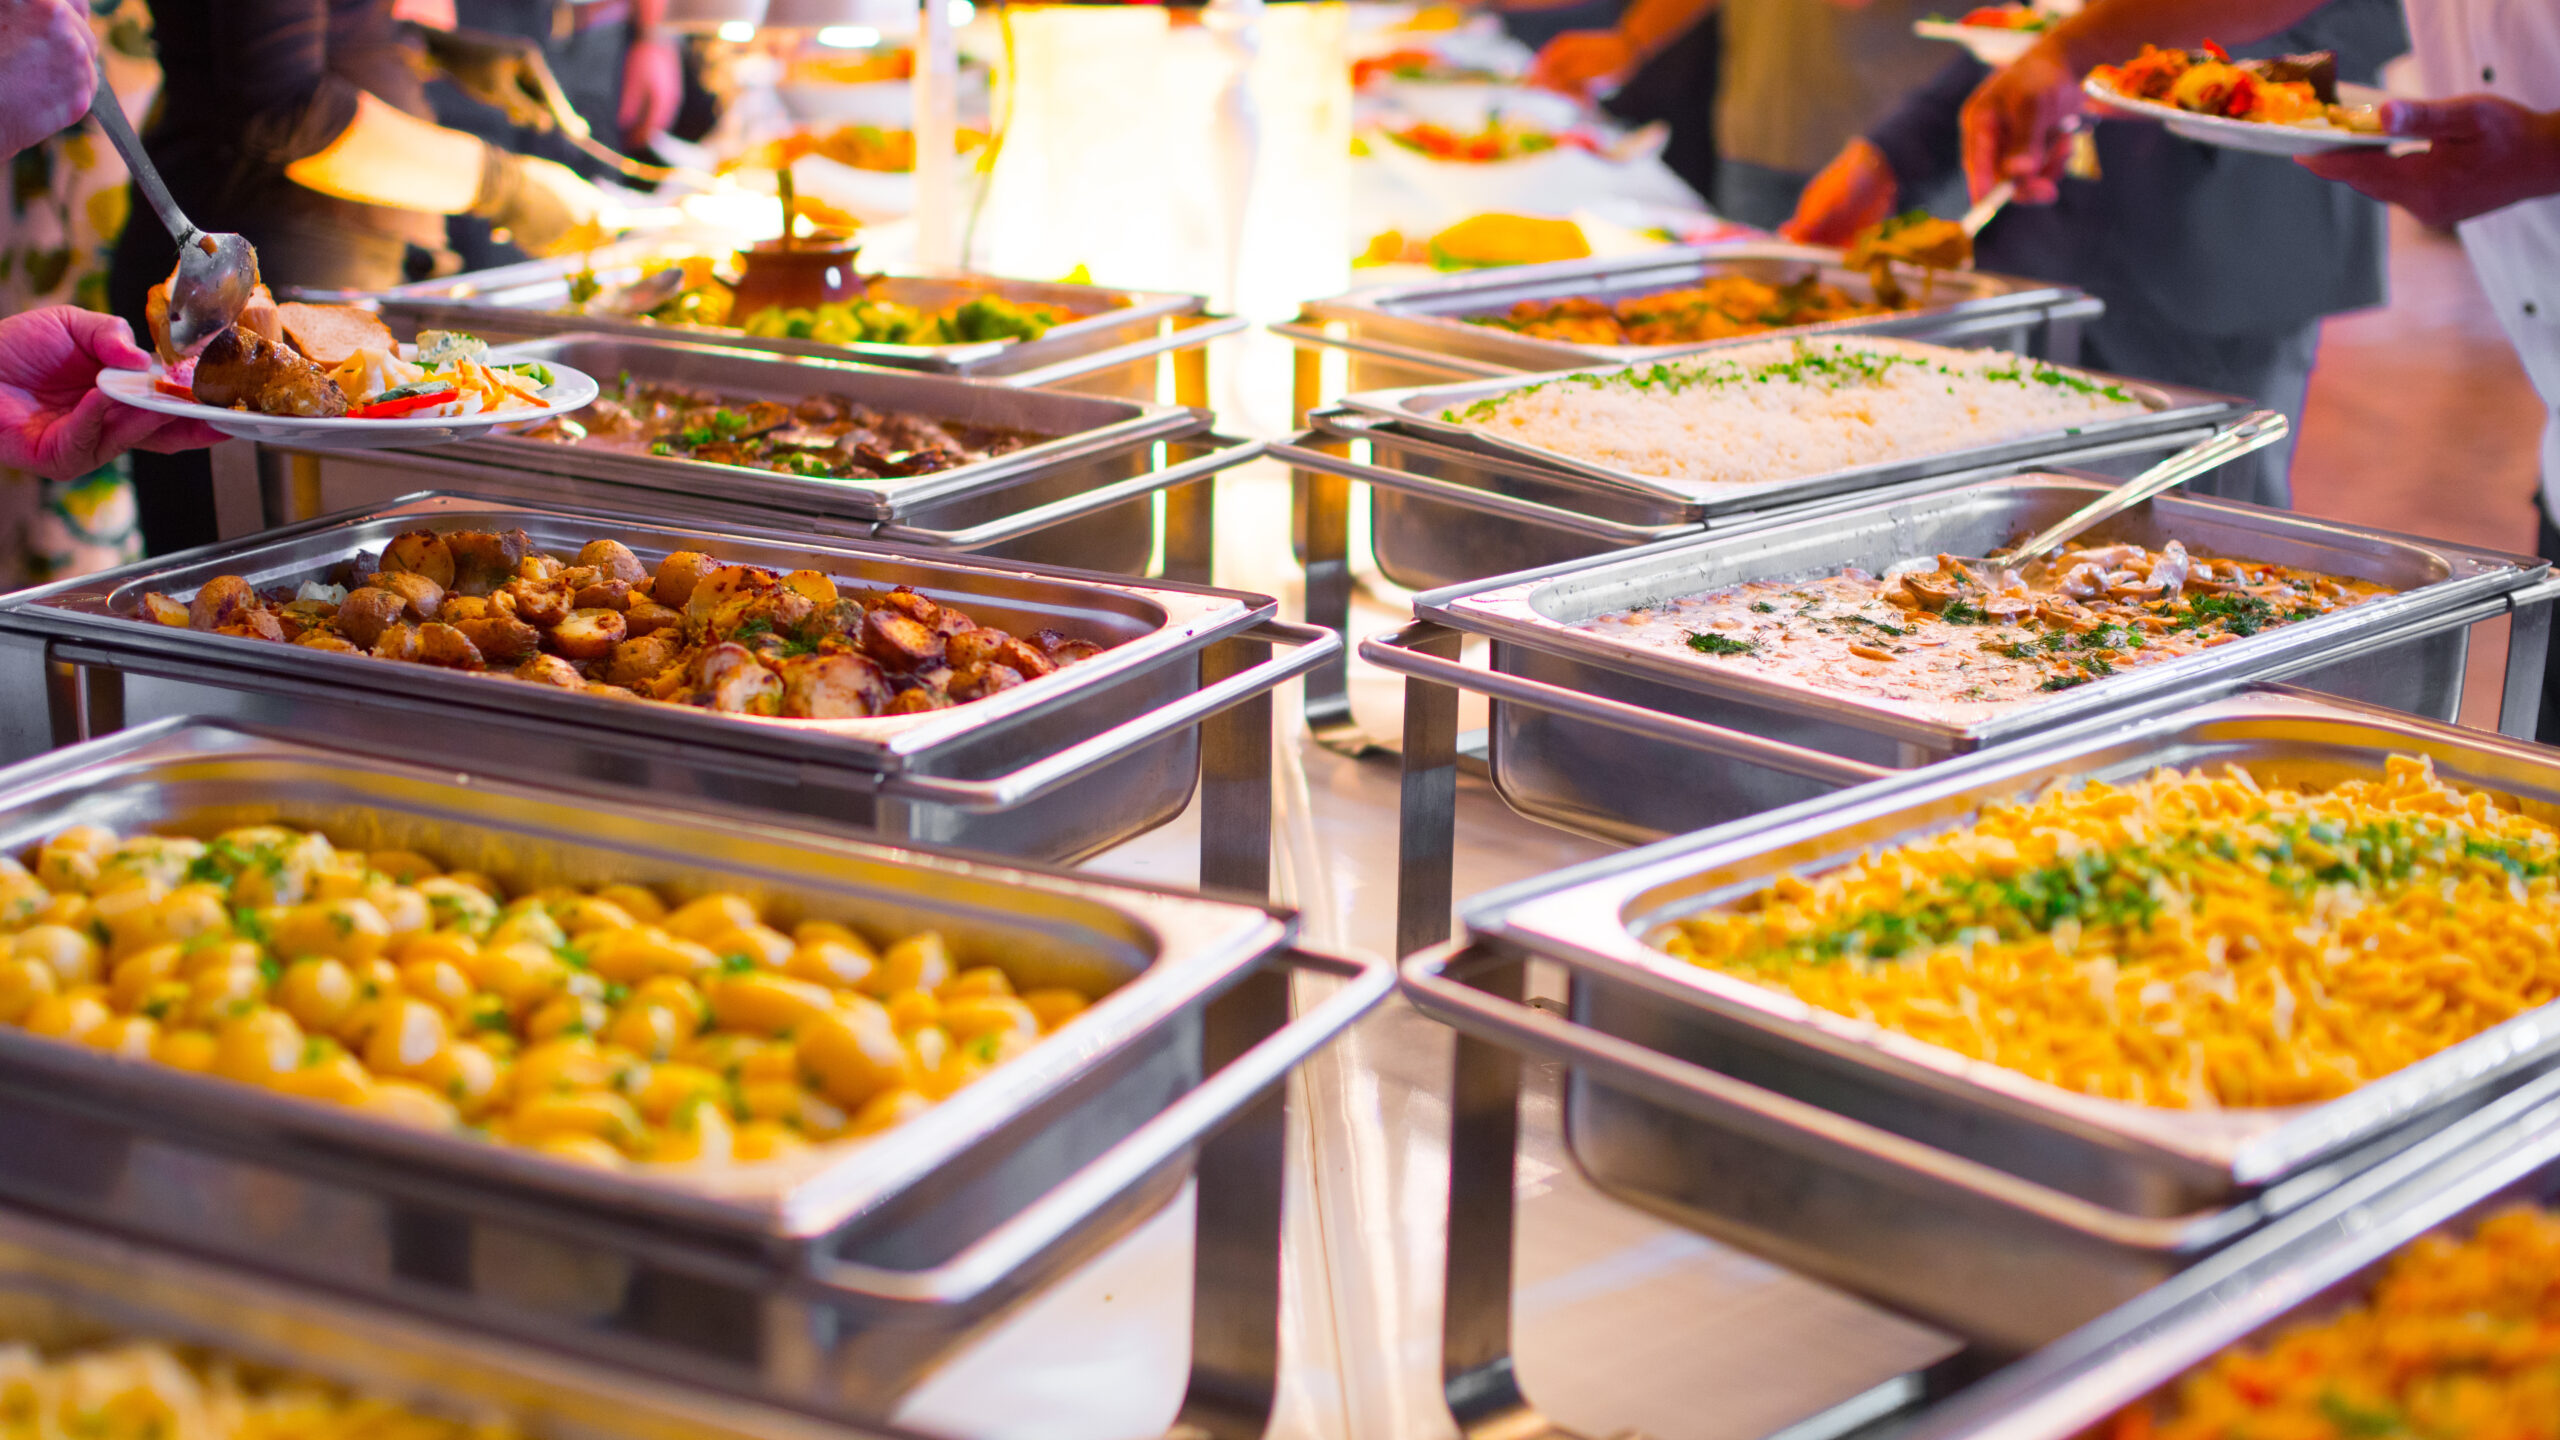 Group catering buffet food indoors